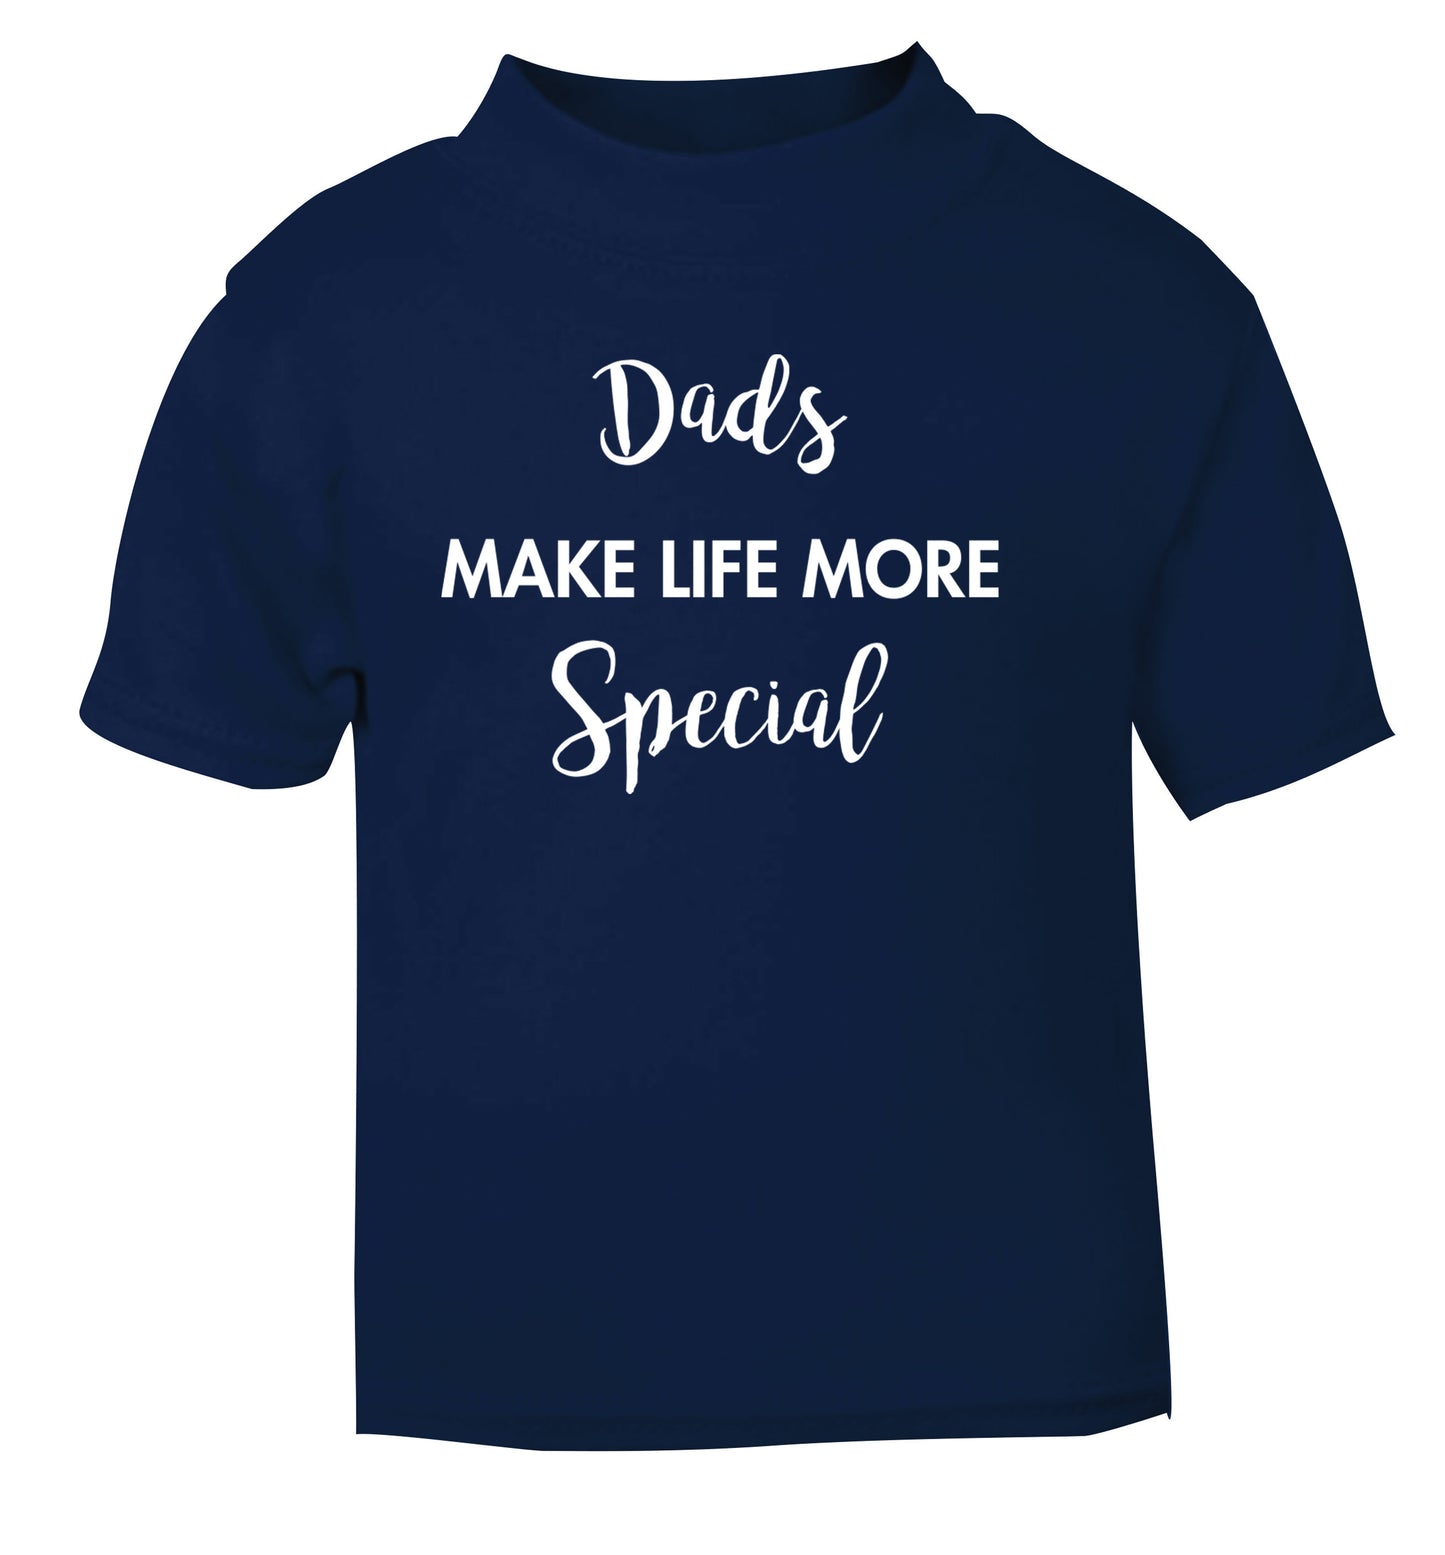 Dads make life more special navy Baby Toddler Tshirt 2 Years